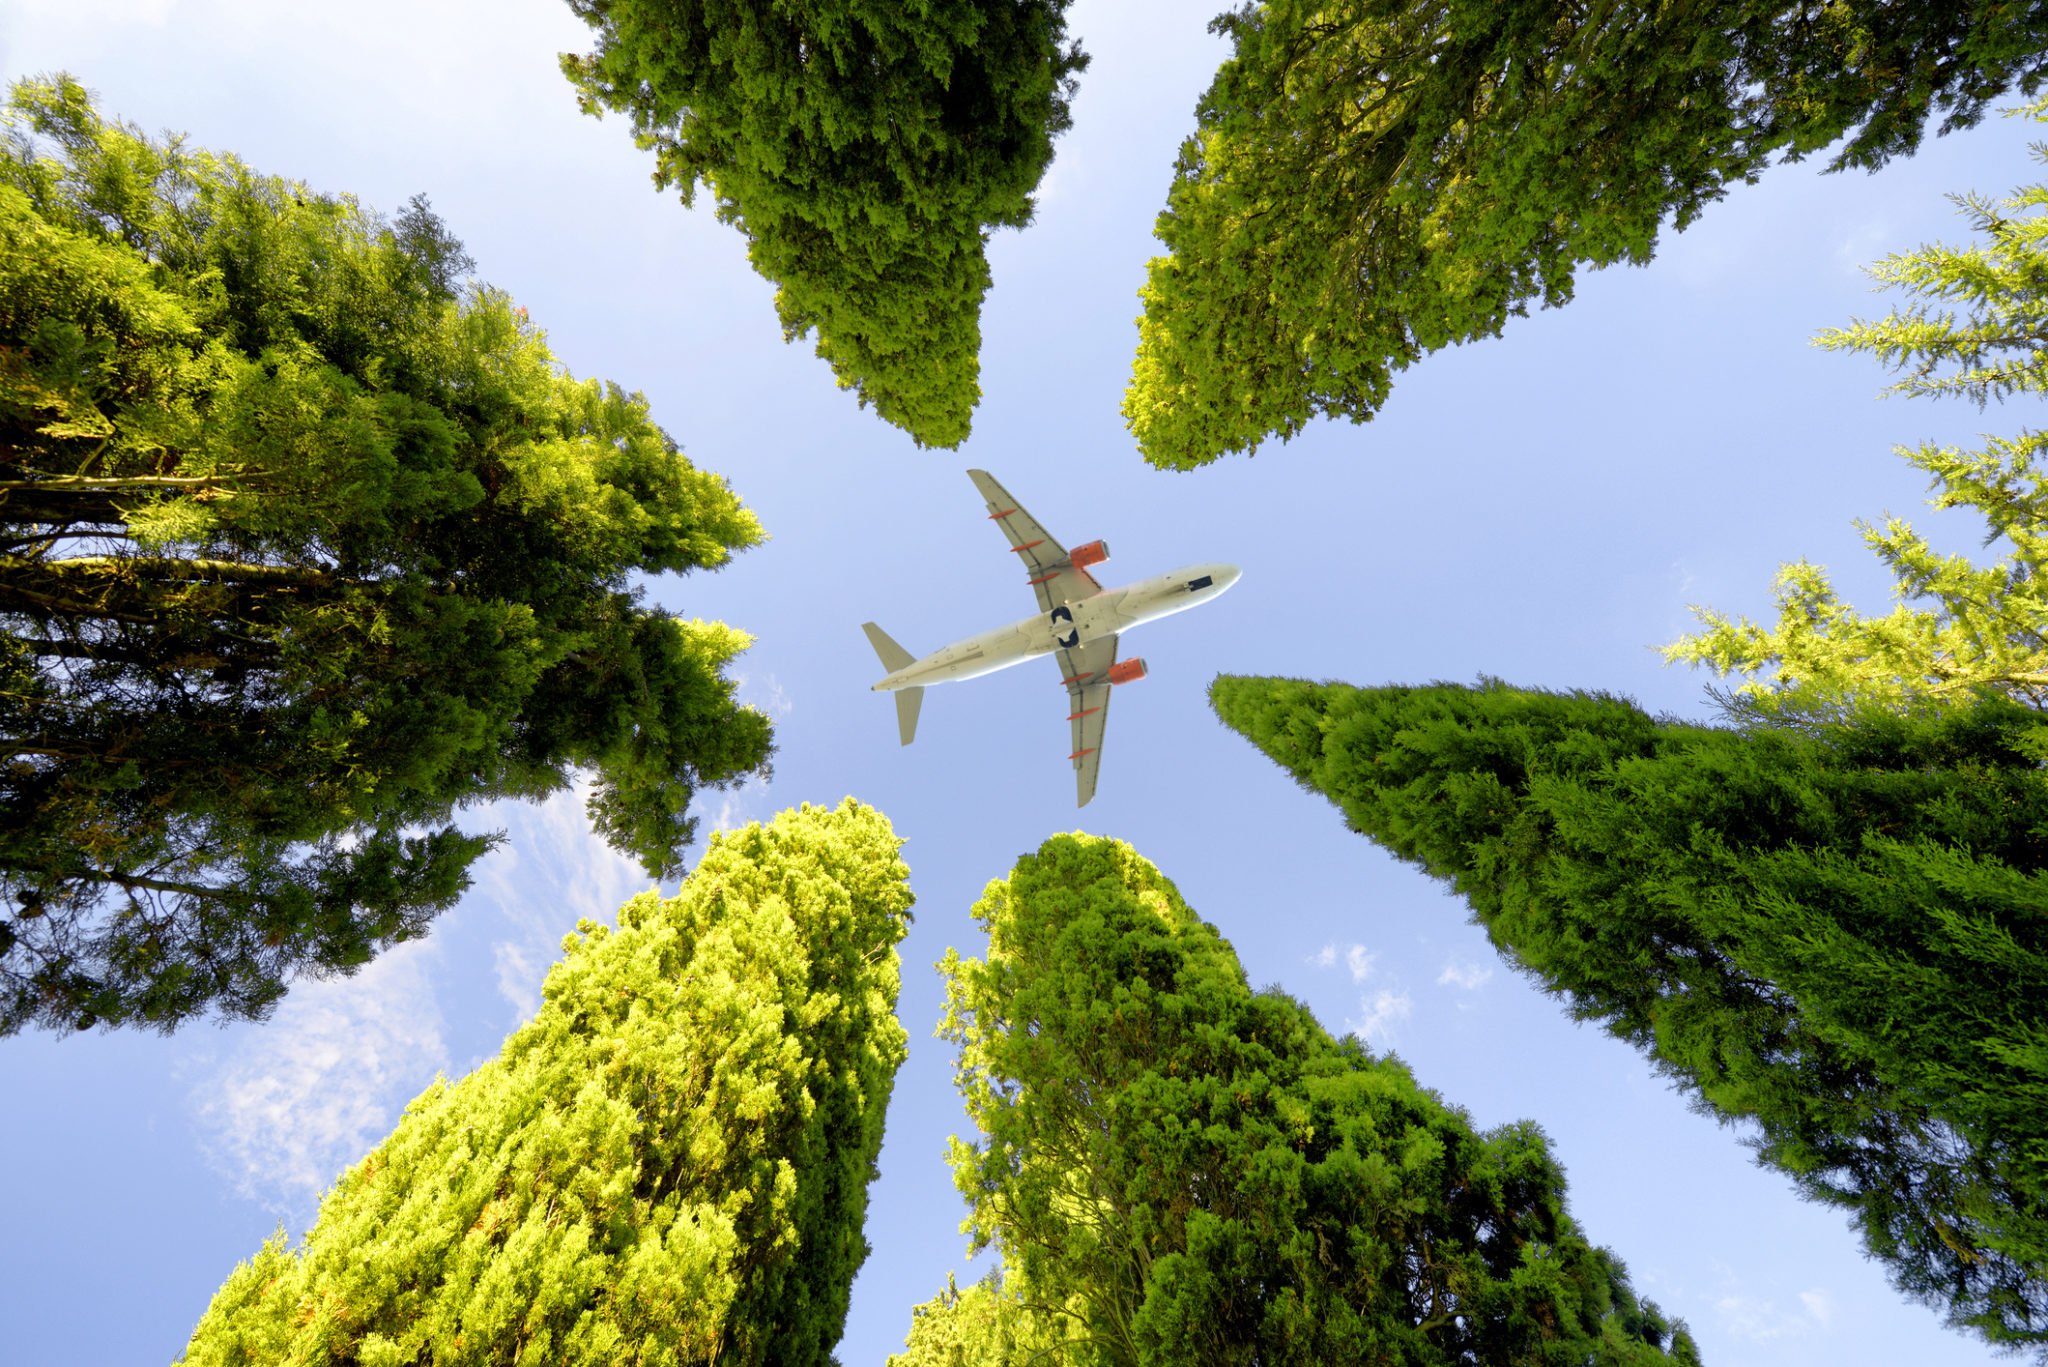 Tobacco, Oil and Sugar for Greener Airplane Travel